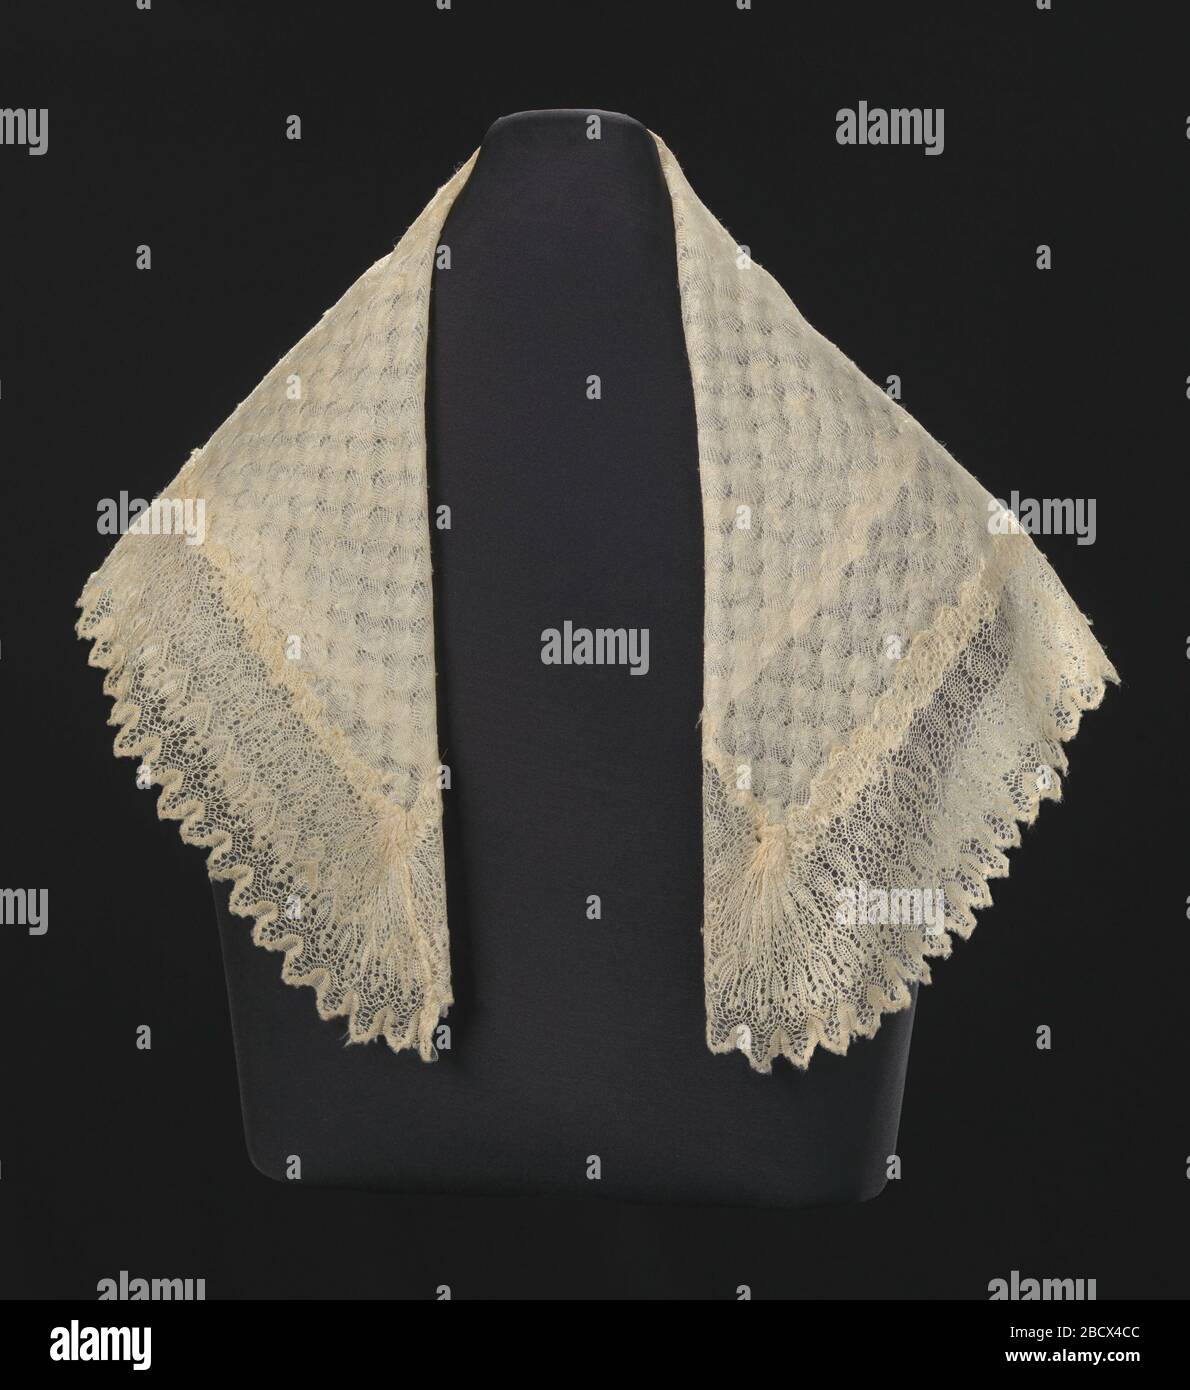 Silk lace and linen shawl given to Harriet Tubman by Queen Victoria. Harriet Tubman escaped the bonds of slavery as a young woman in the early 1800s. She returned to the South many times as a "conductor" on the Underground Railroad to lead other African Americans to freedom. Silk lace and linen shawl given to Harriet Tubman by Queen Victoria Stock Photo